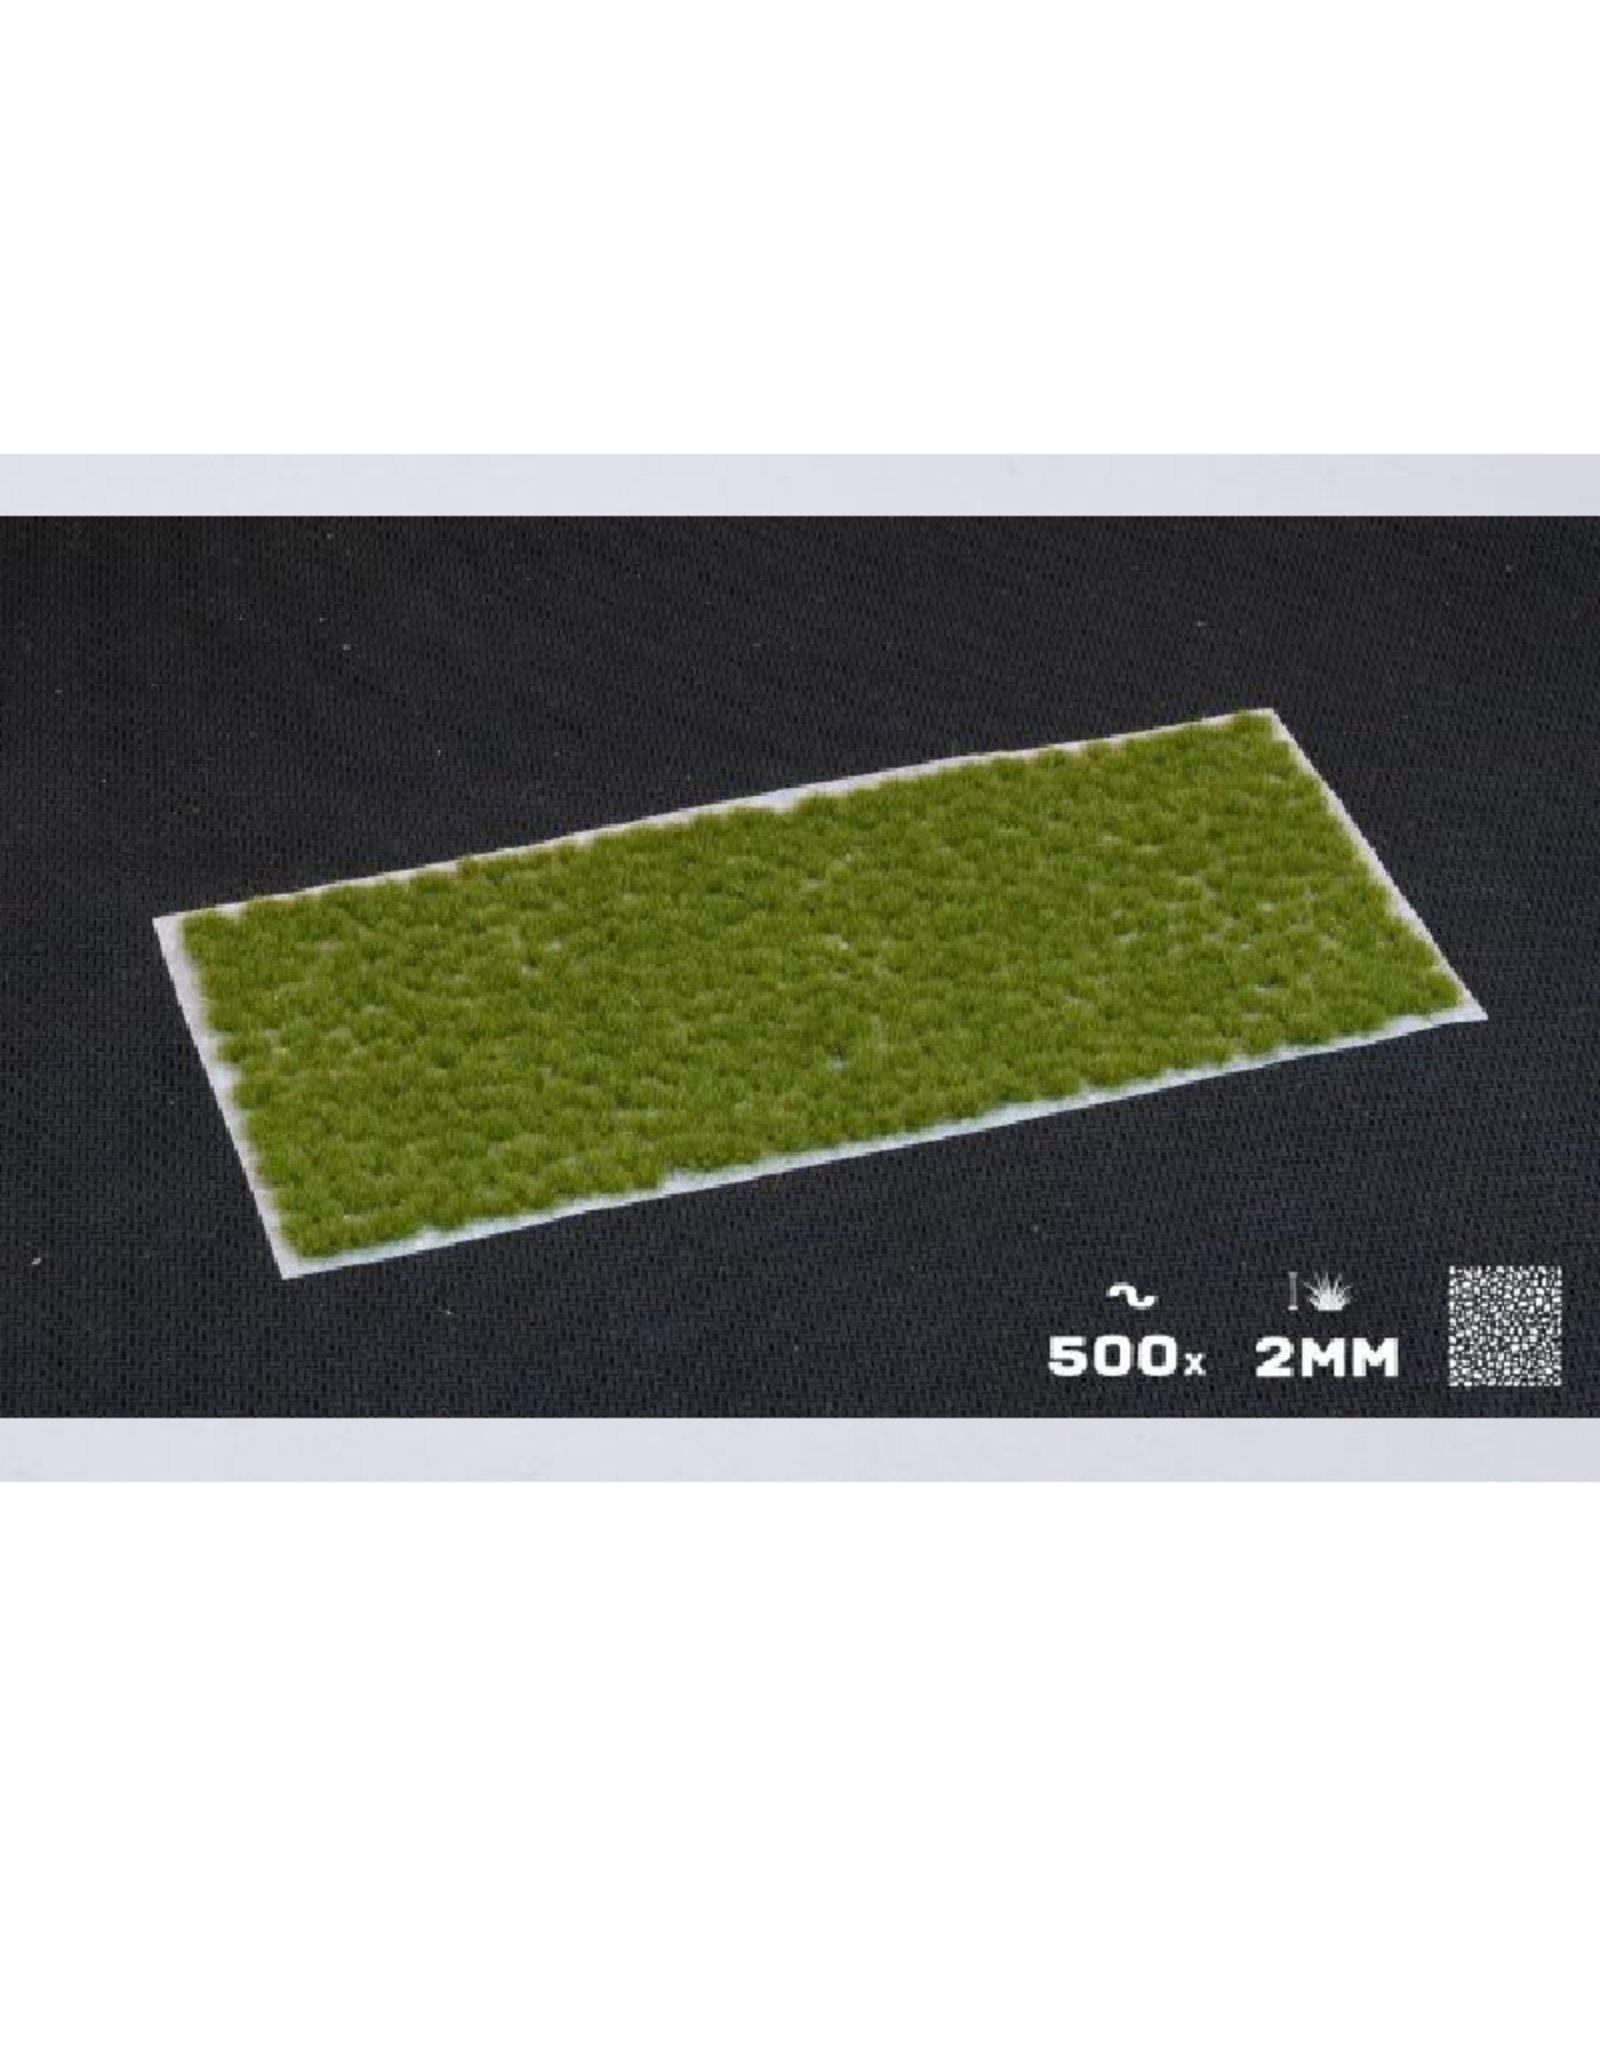 Gamers' Grass Tiny Dry Green tufts (2mm)